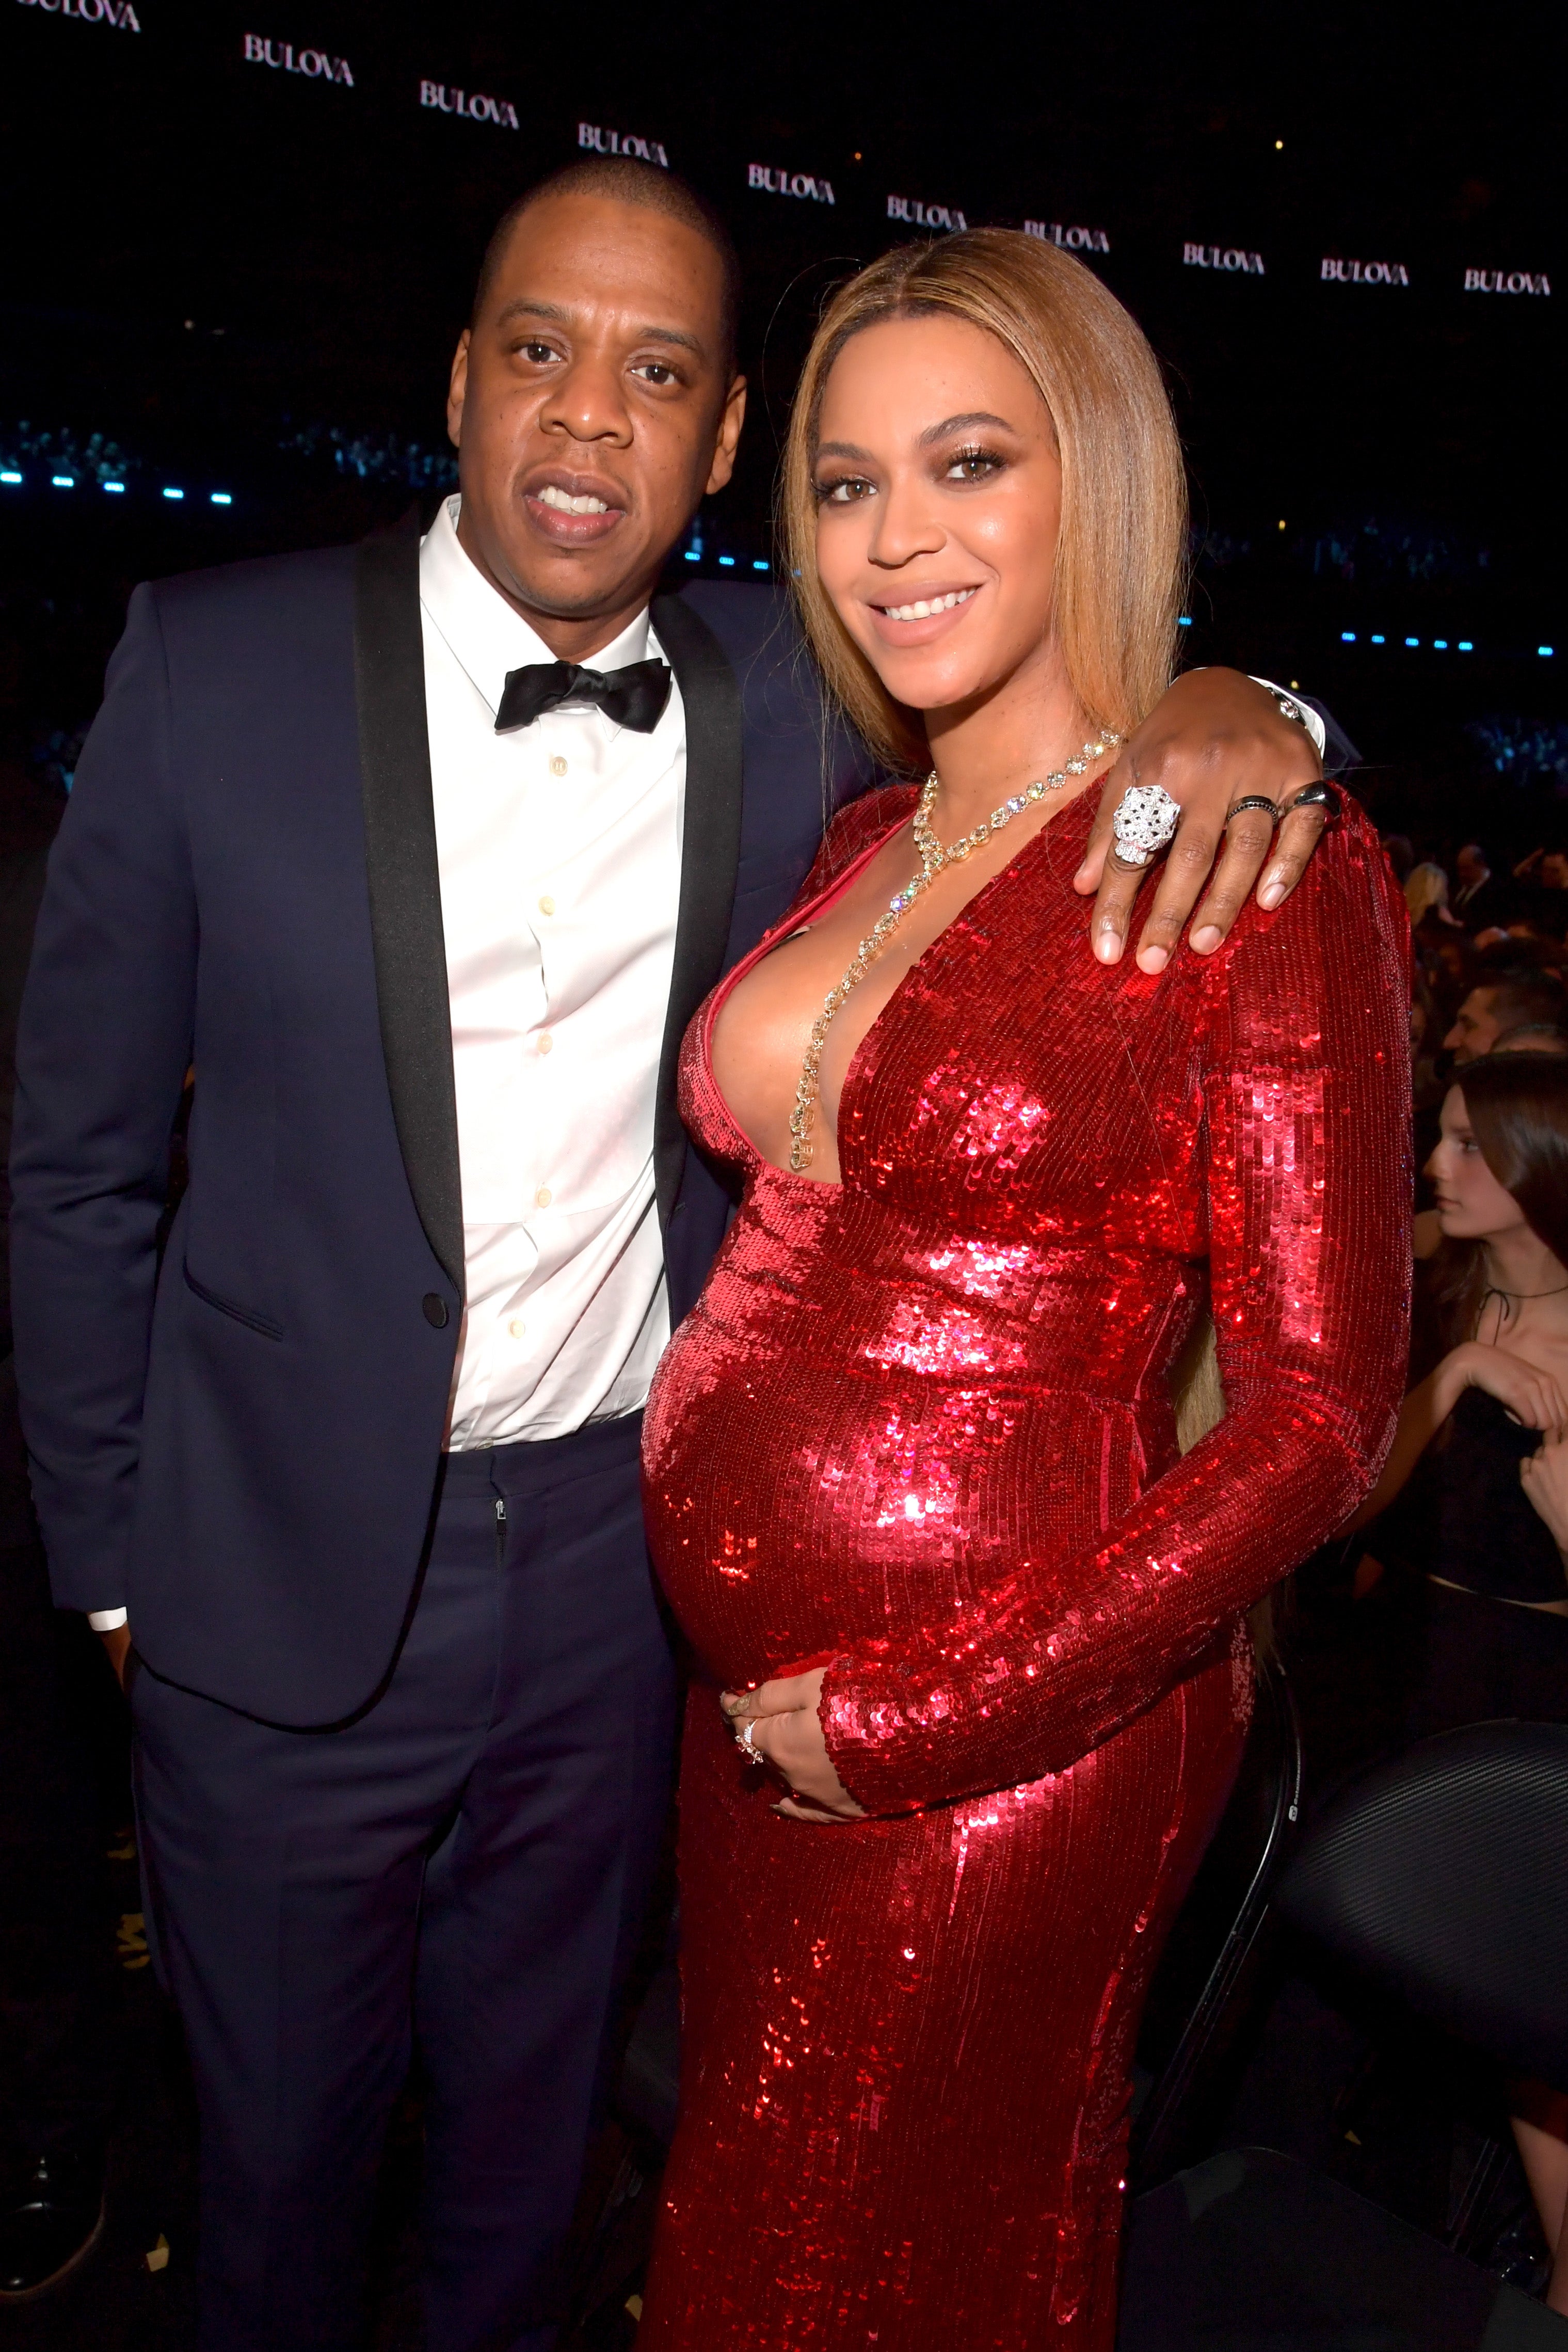 They're Here! Beyoncé and Jay Z Welcome Twins
